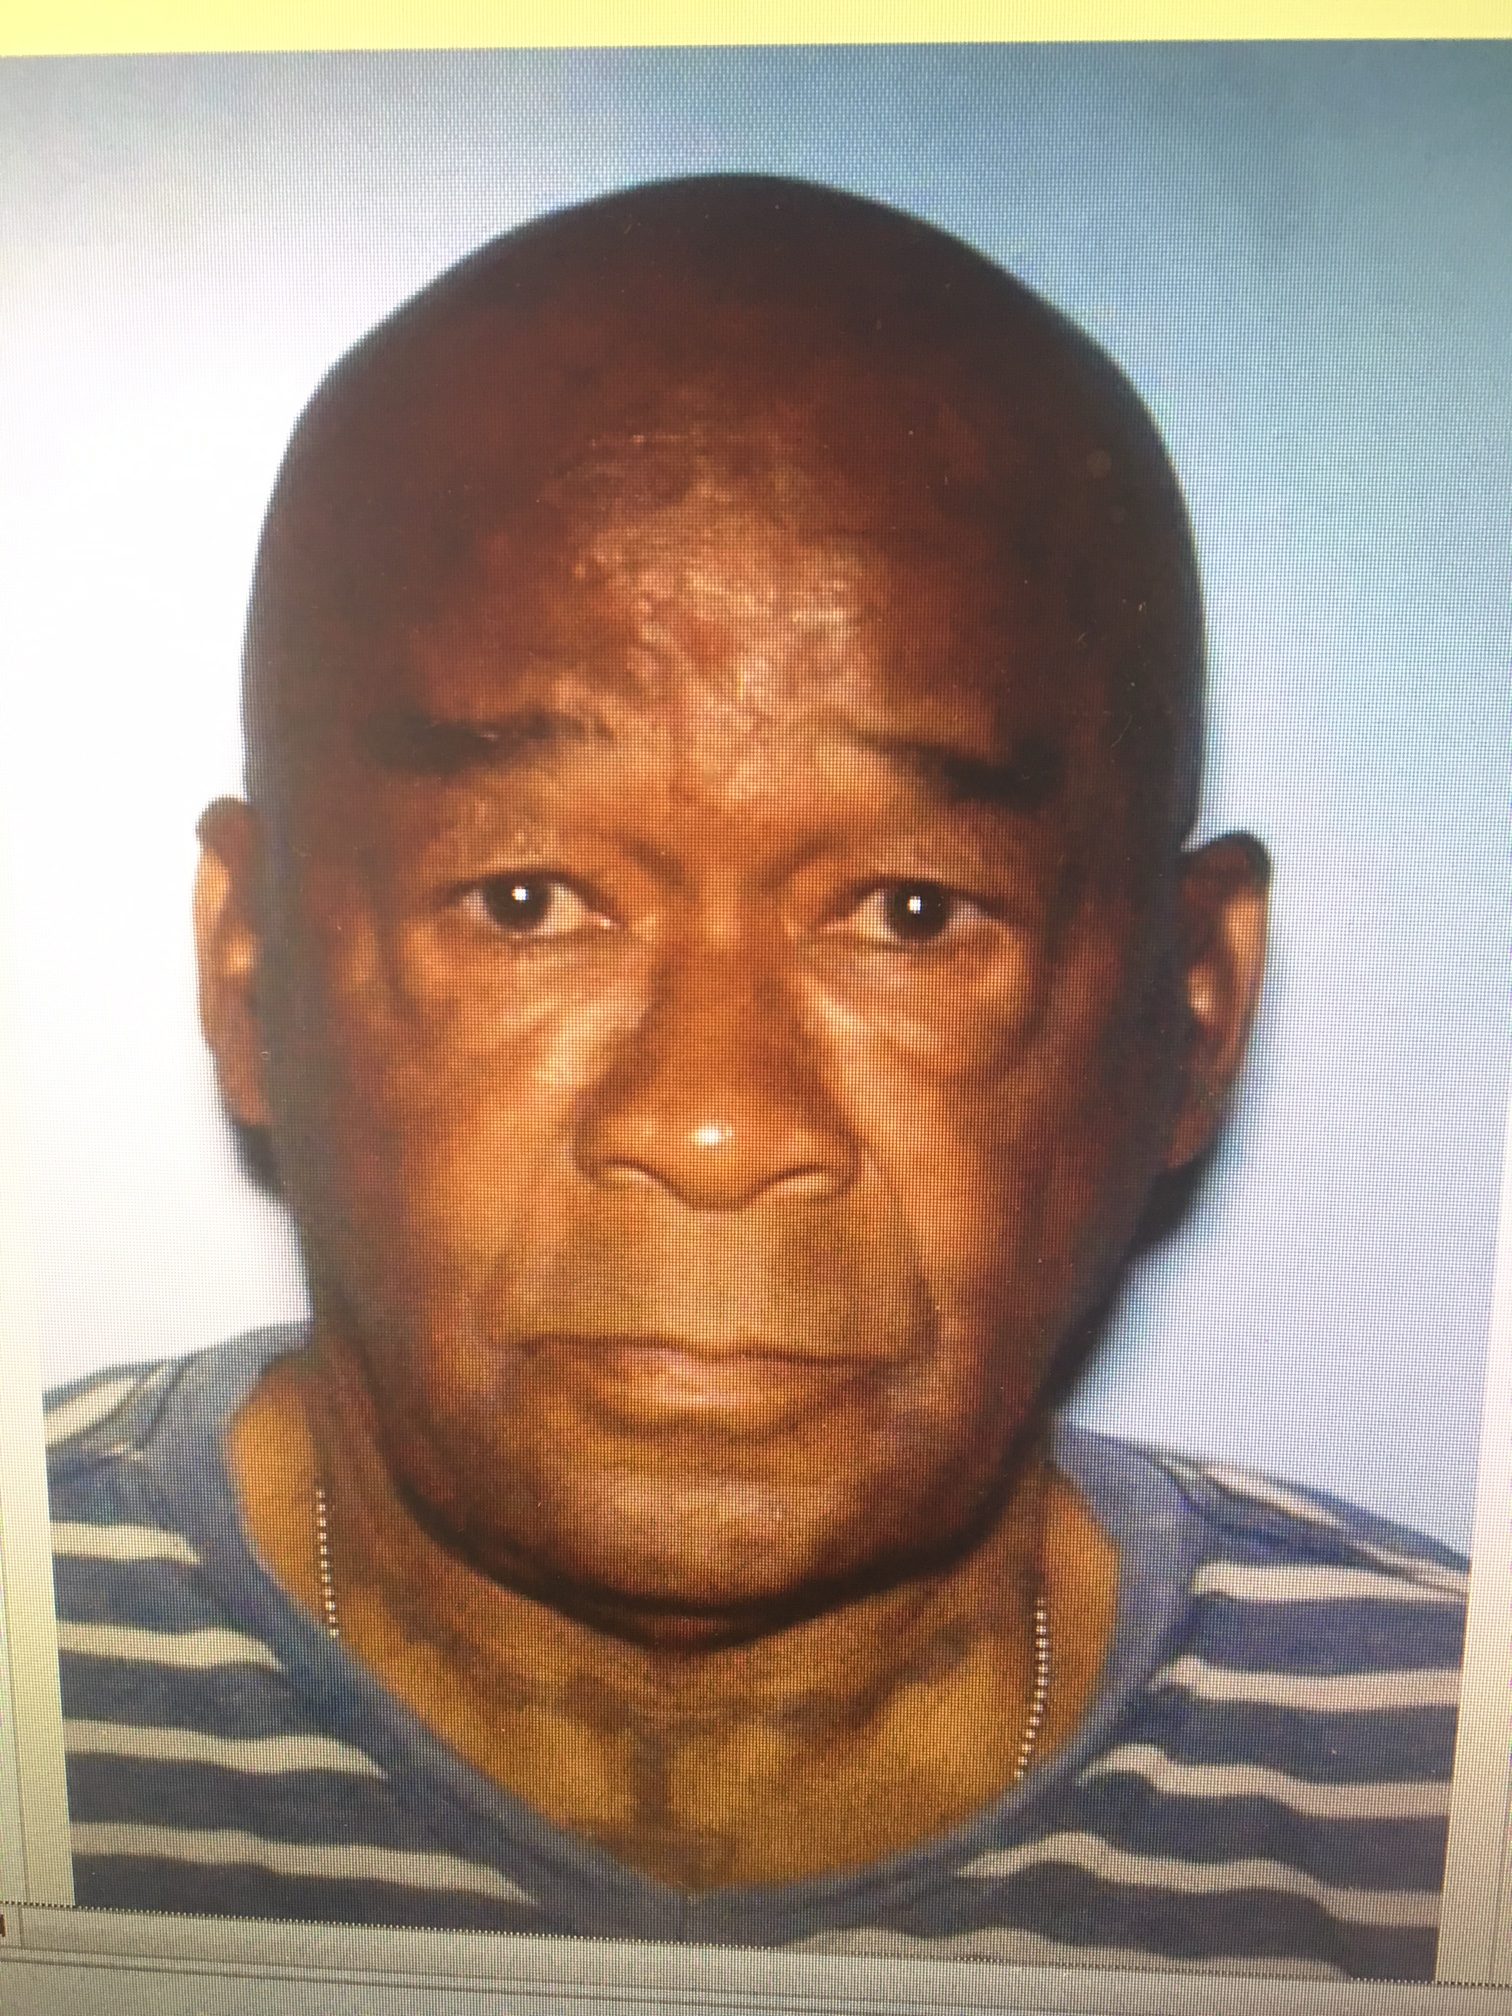 State, county police searching for Georgia man missing in St. Clair County